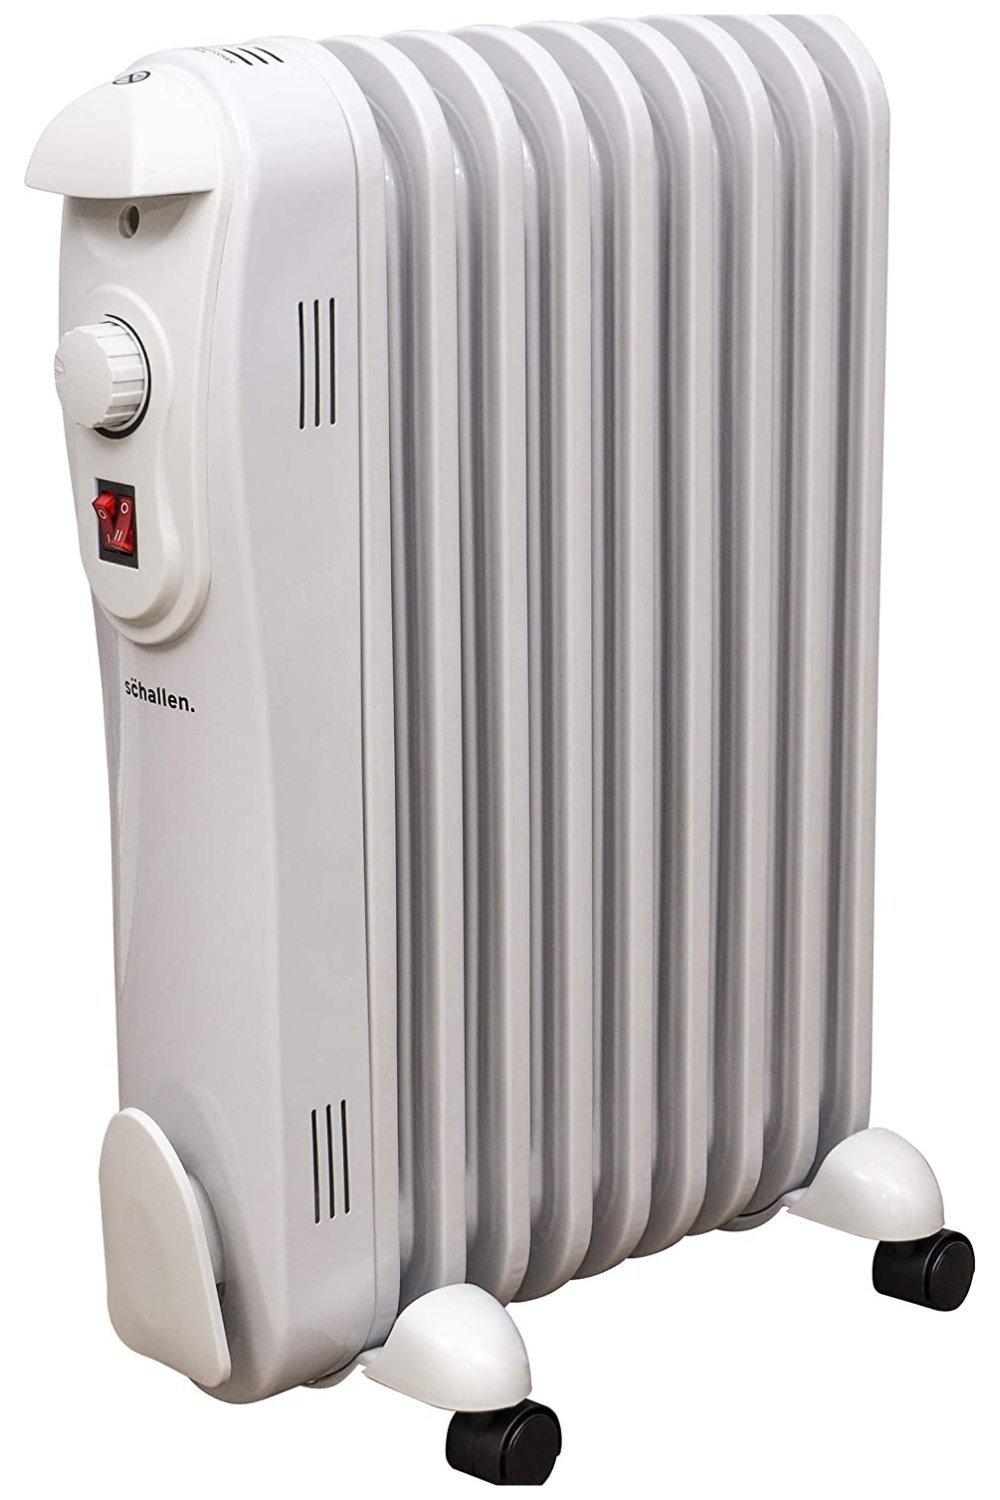 2000W 9 Fin Portable Electric Slim Oil Filled Radiator Heater with Adjustable Temperature- White